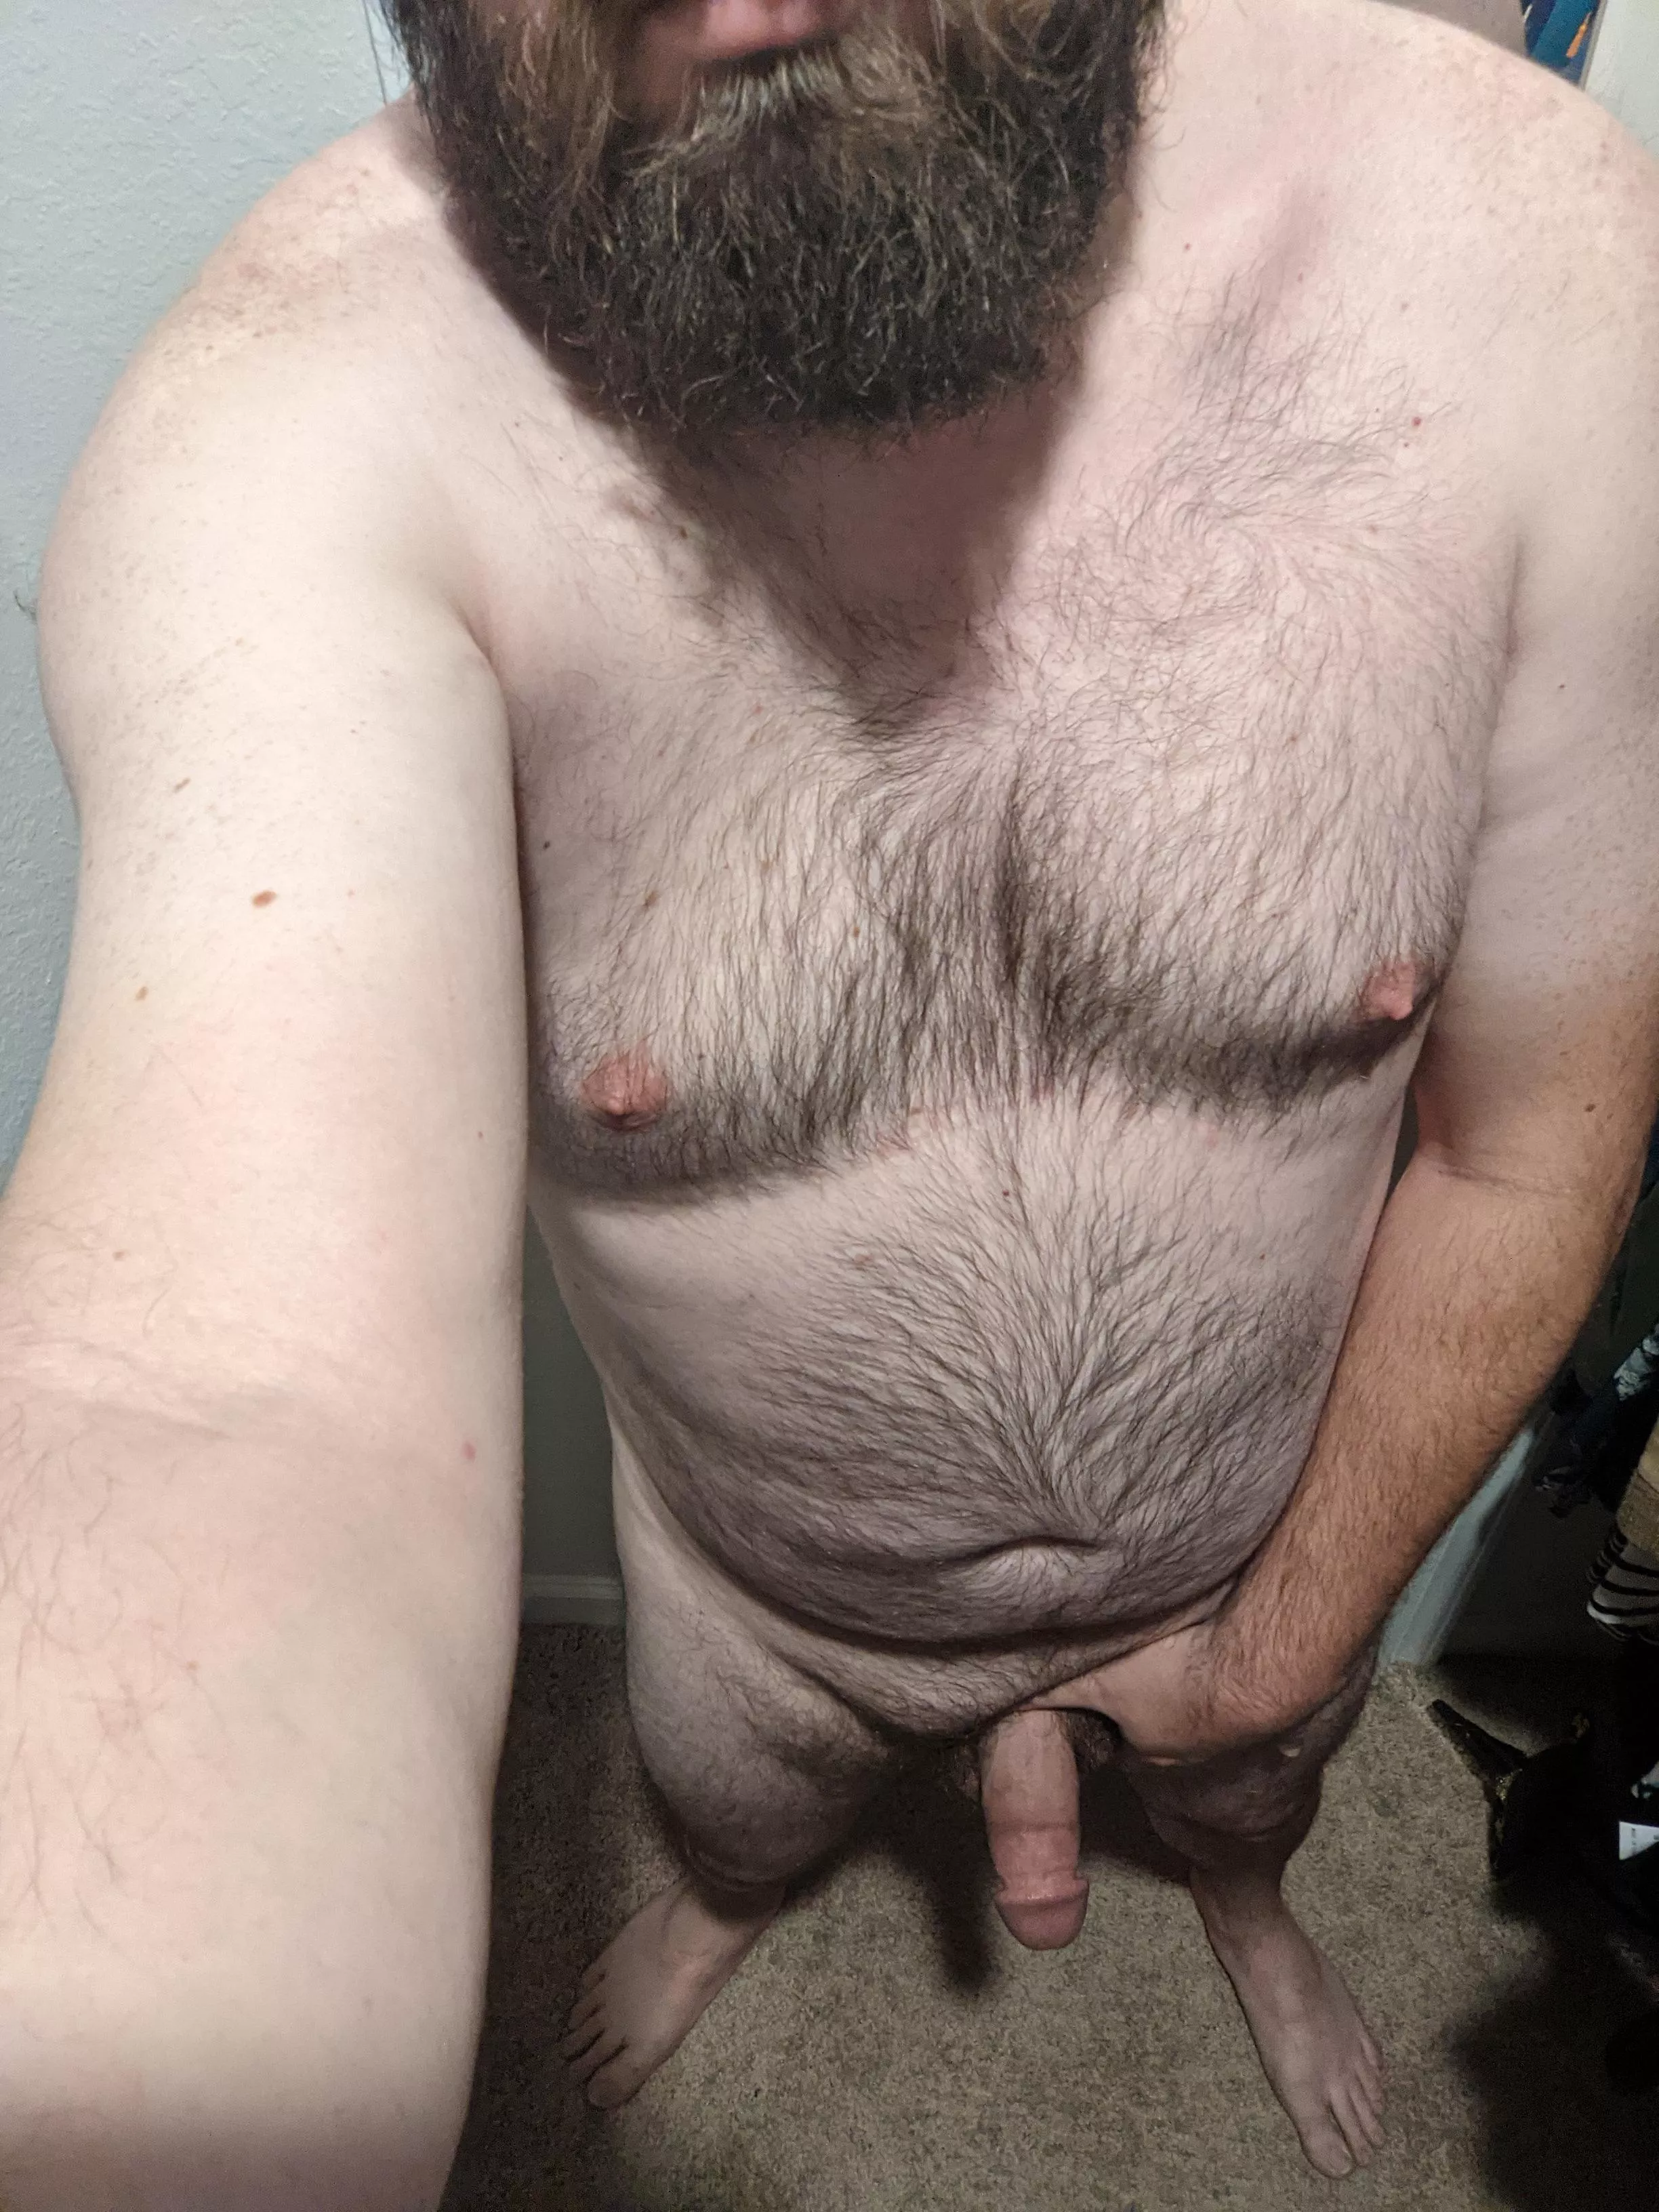 Long weekend down, Thick daddy up.